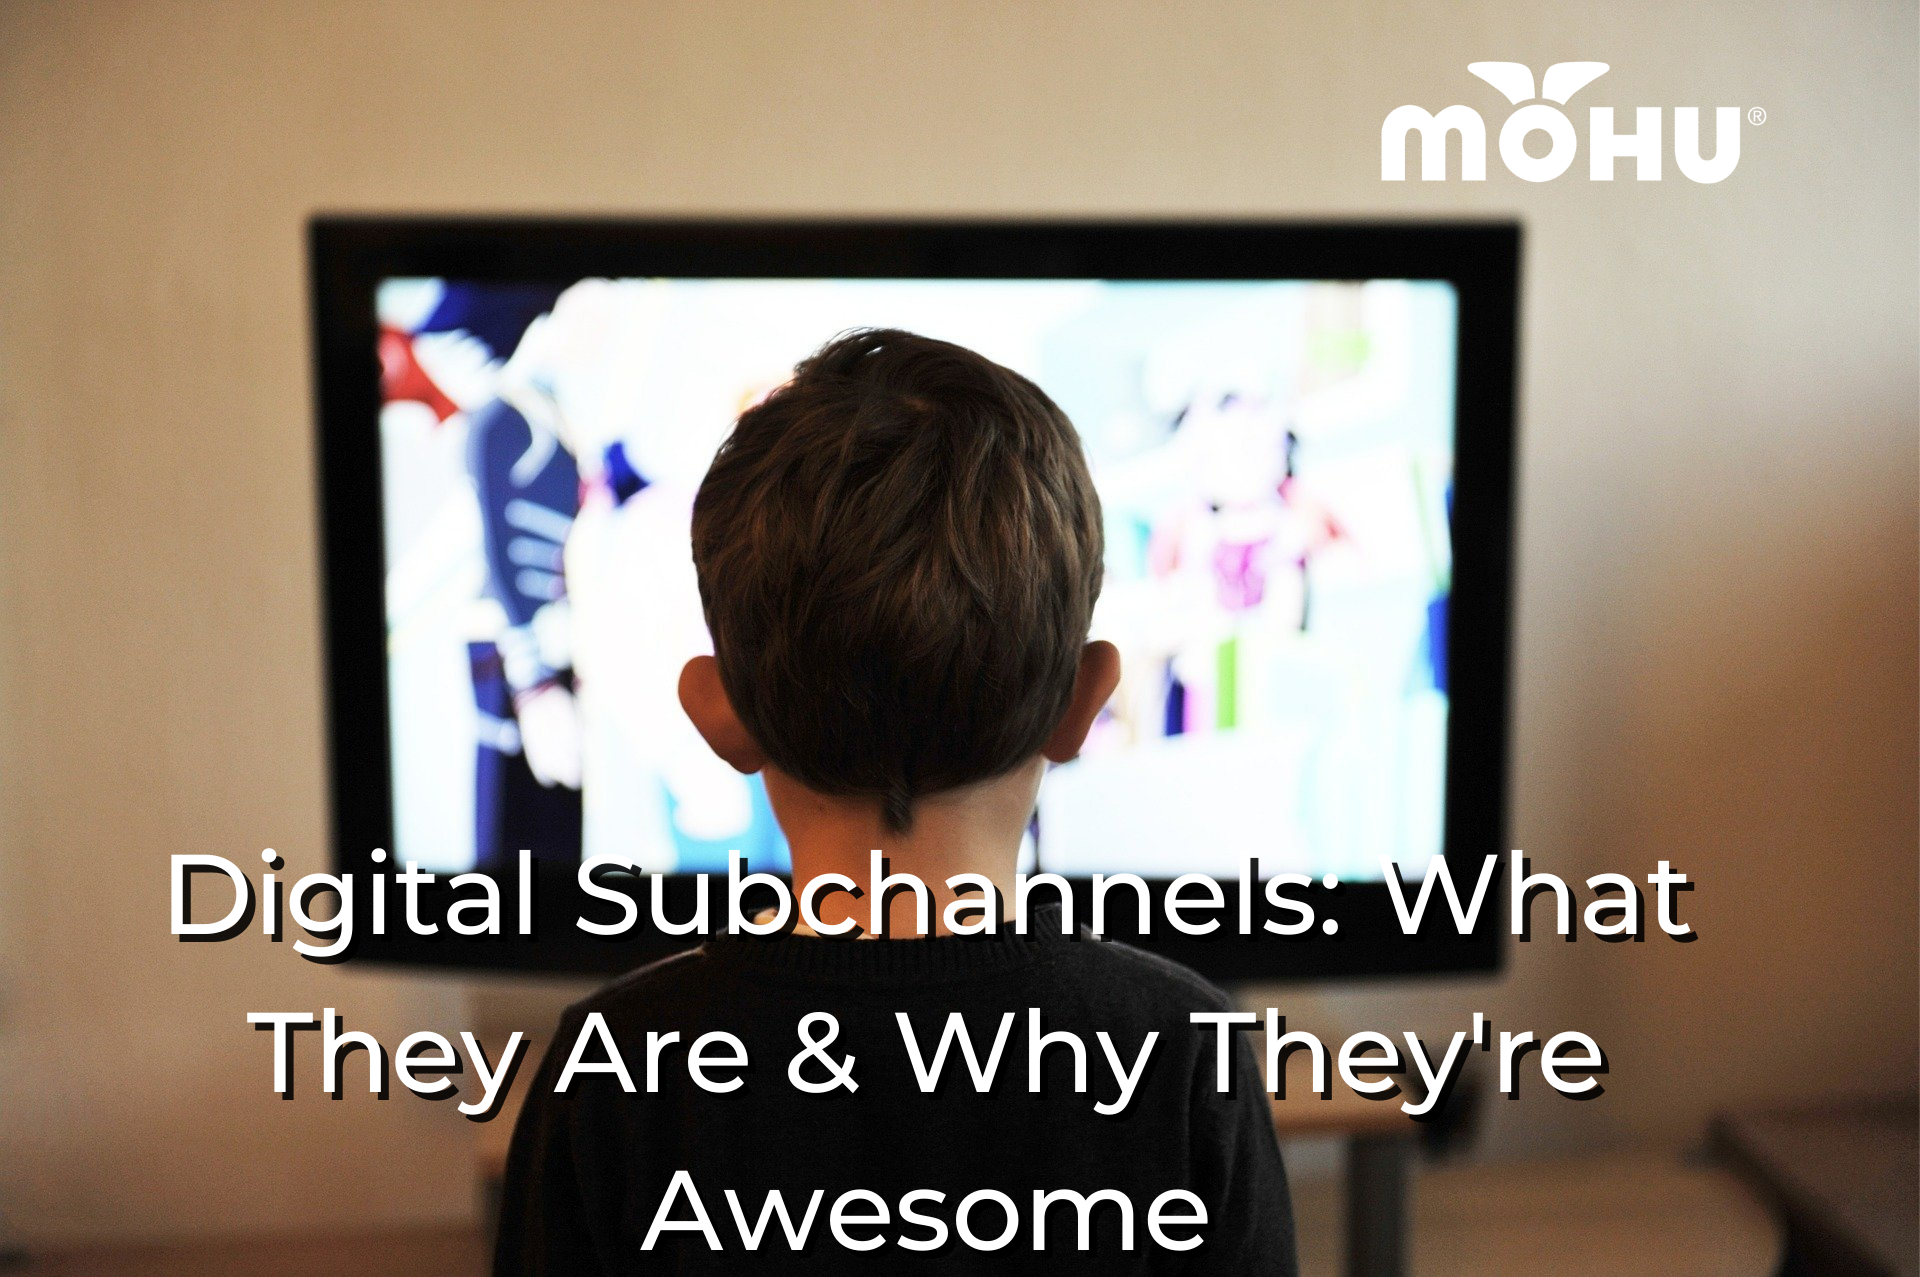 Boy sitting in front of TV screen, Digital Subchannels: What They Are & Why They're Awesome, Mohu